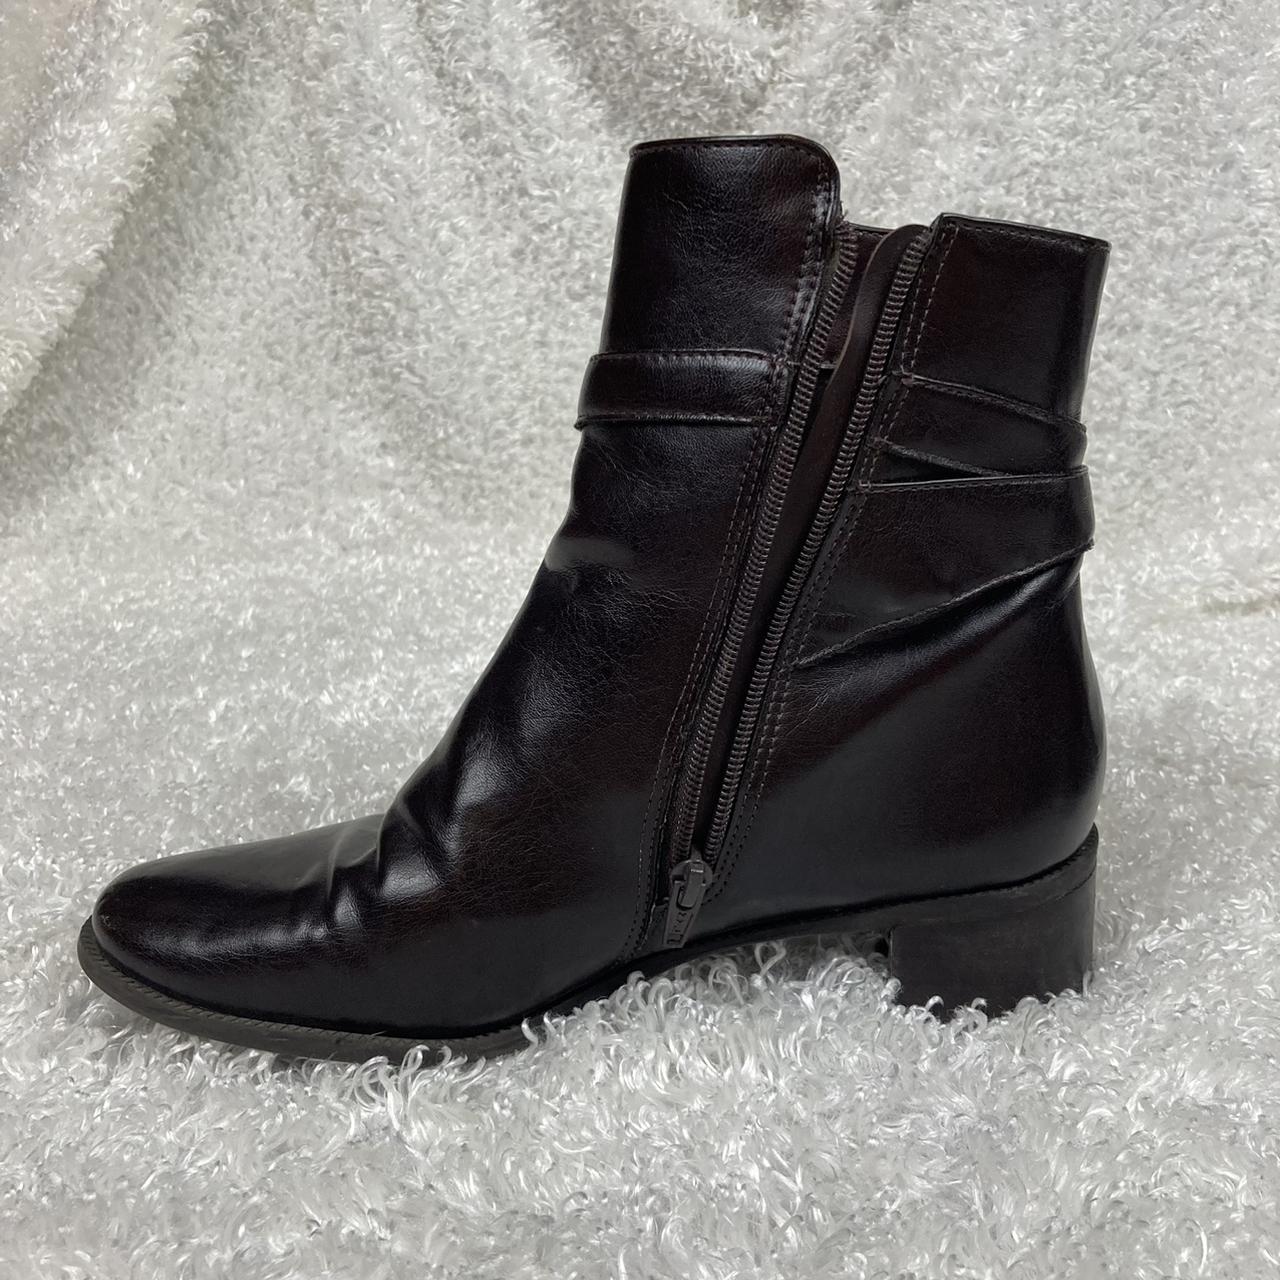 Dark chocolate brown heeled ankle boots! Features... - Depop